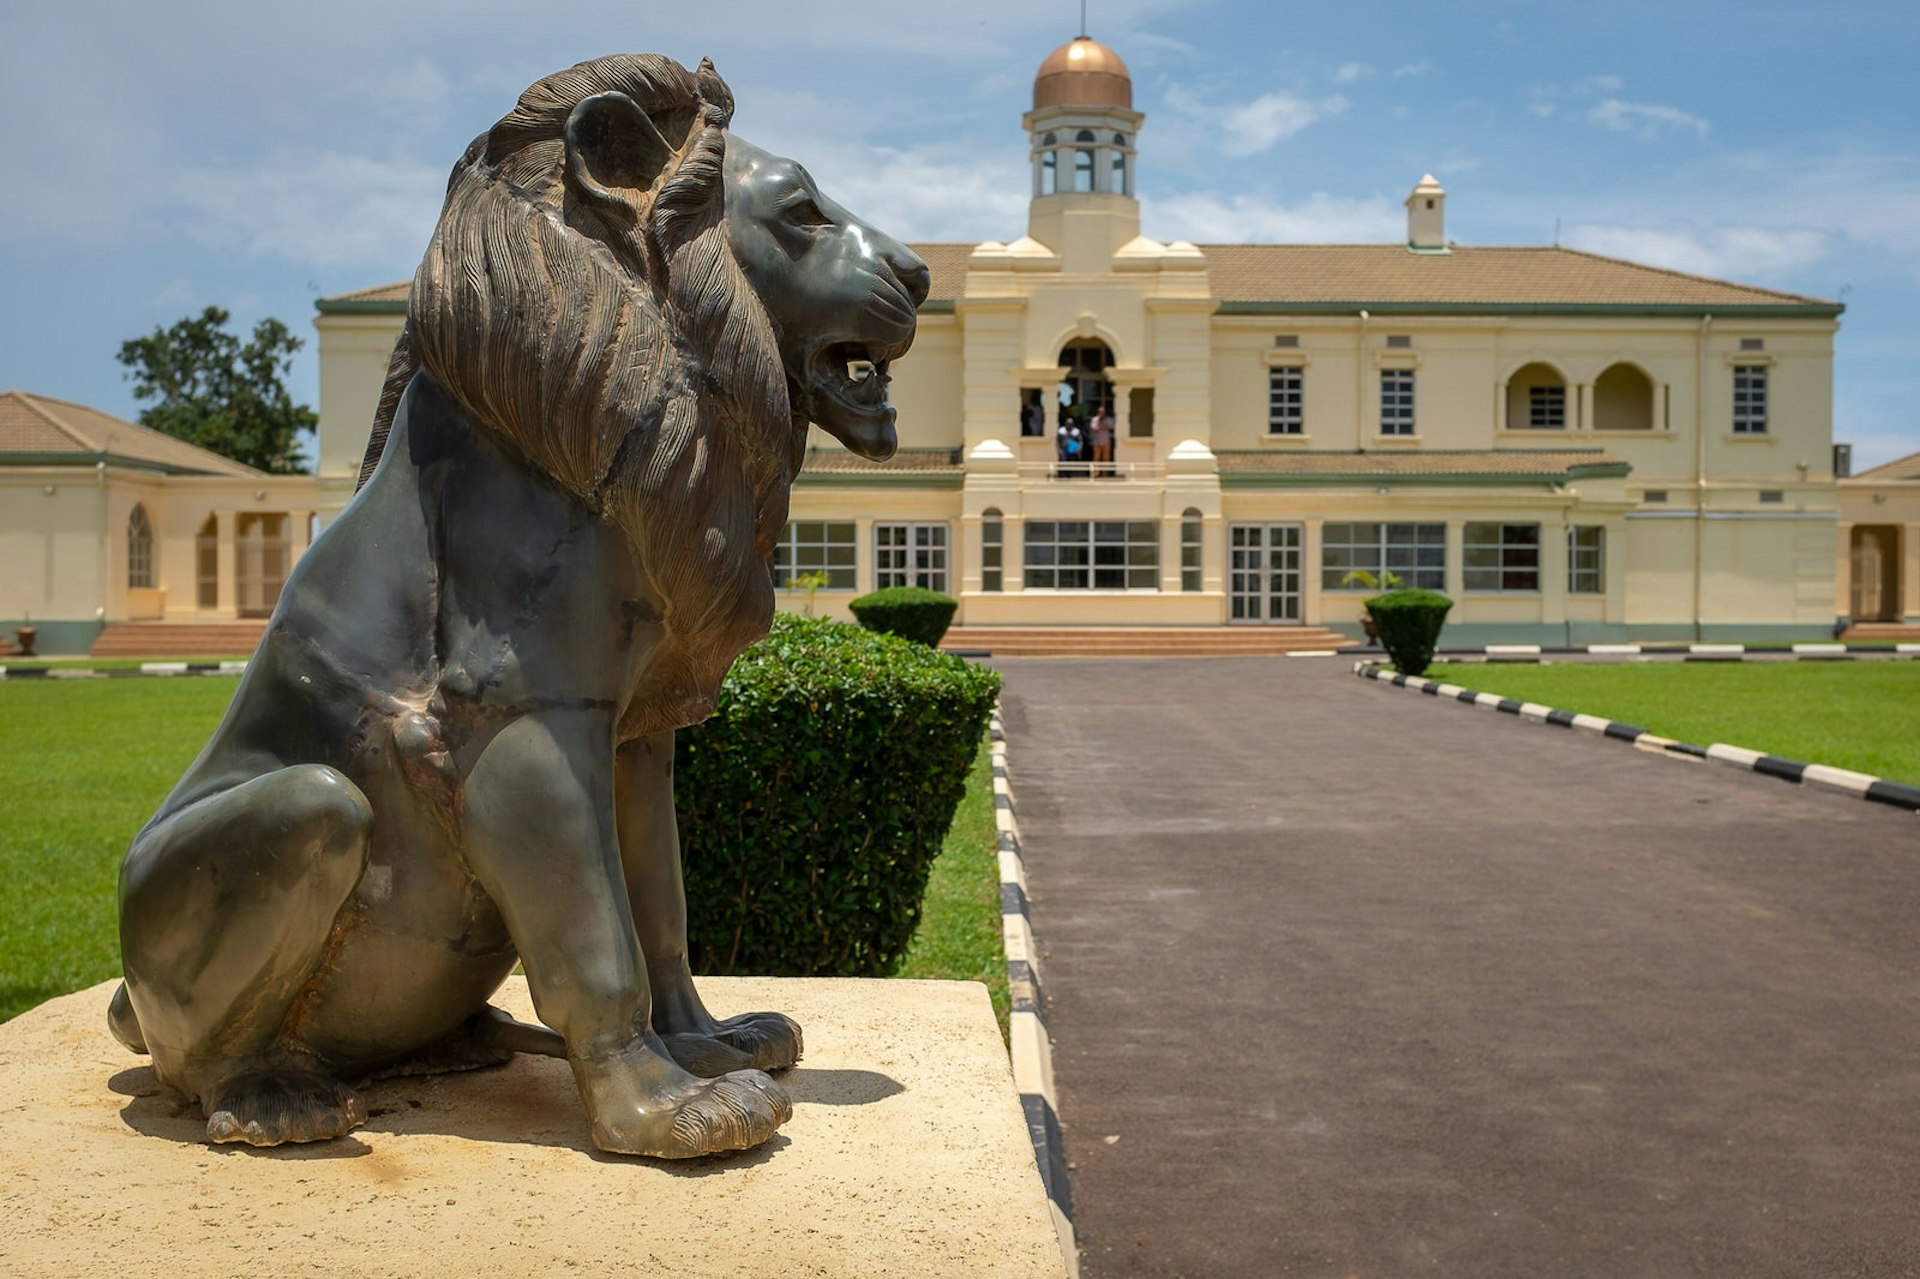 A large stone lion stands next to a paved path leading to Mengo Palace in the distance; the cream-coloured building is grand, with a gold-topped tower